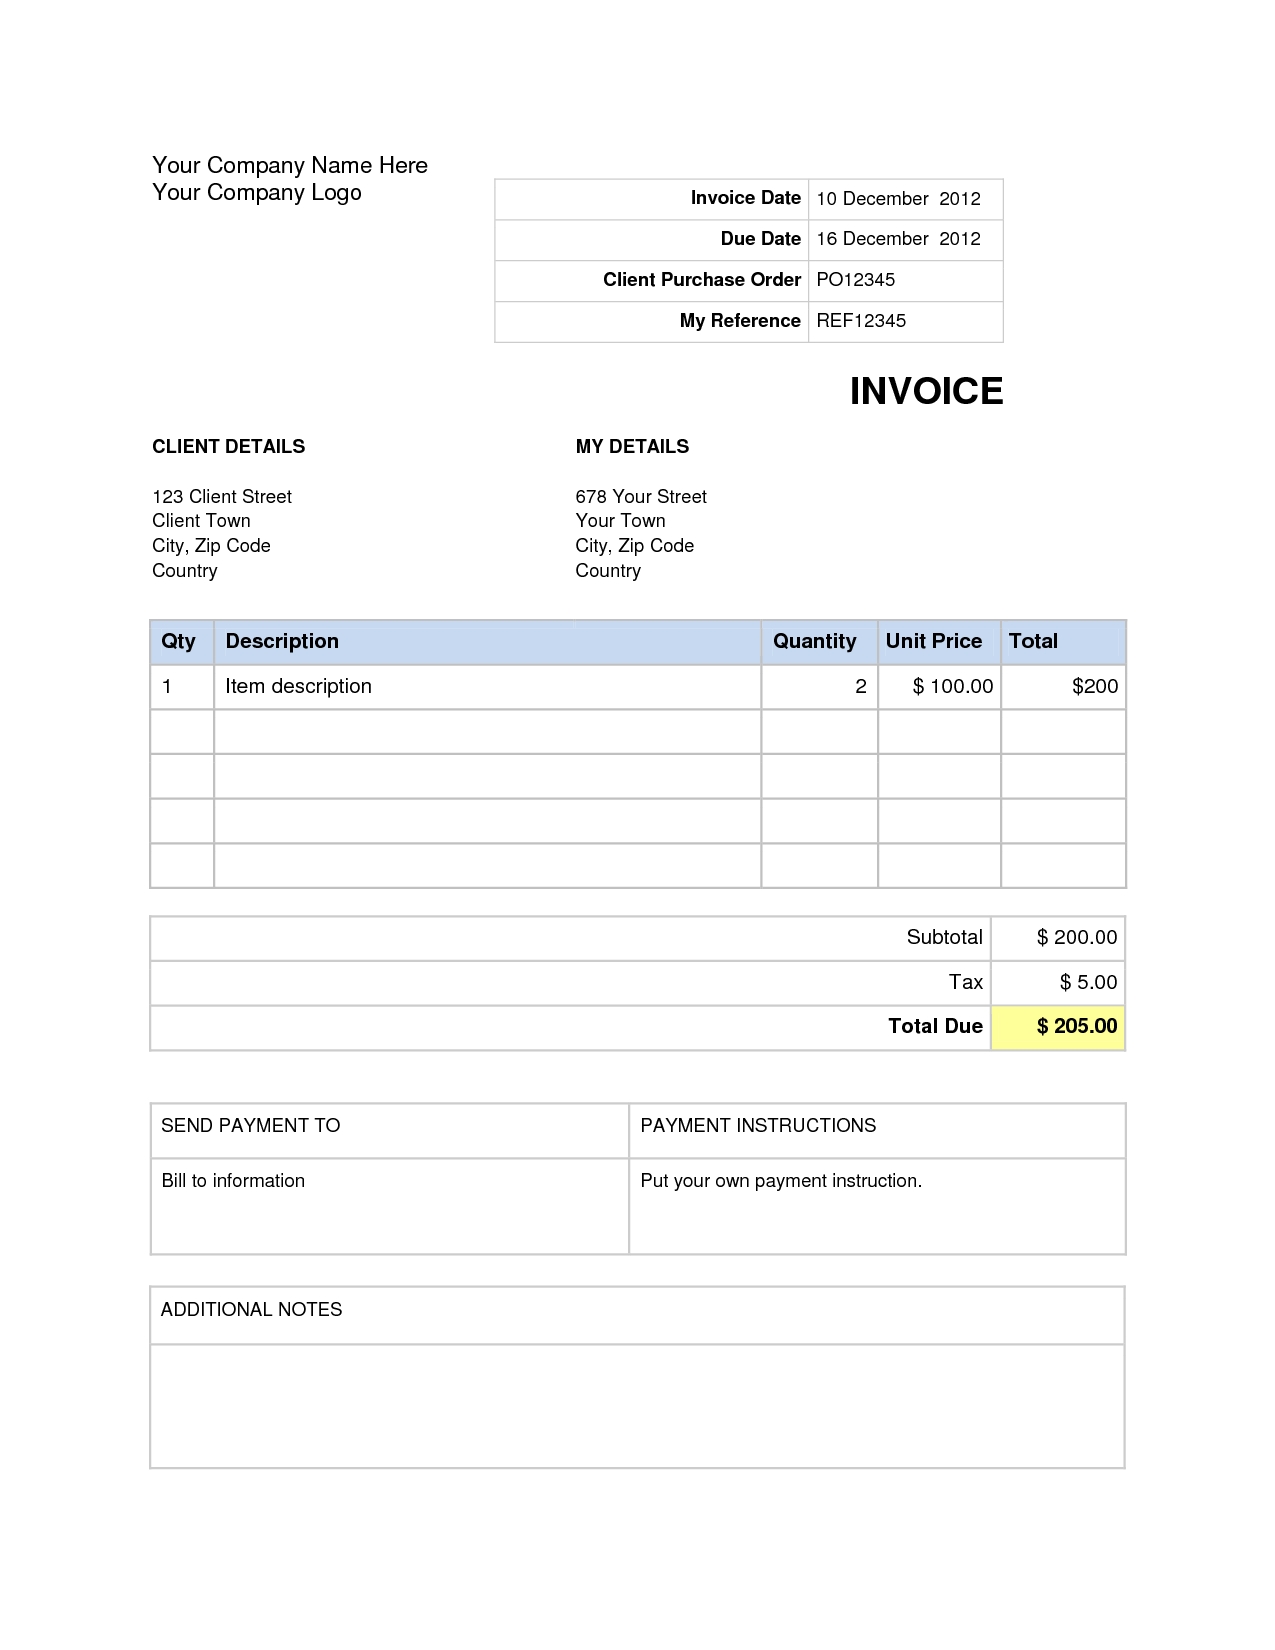 how to create an invoice in word 2010